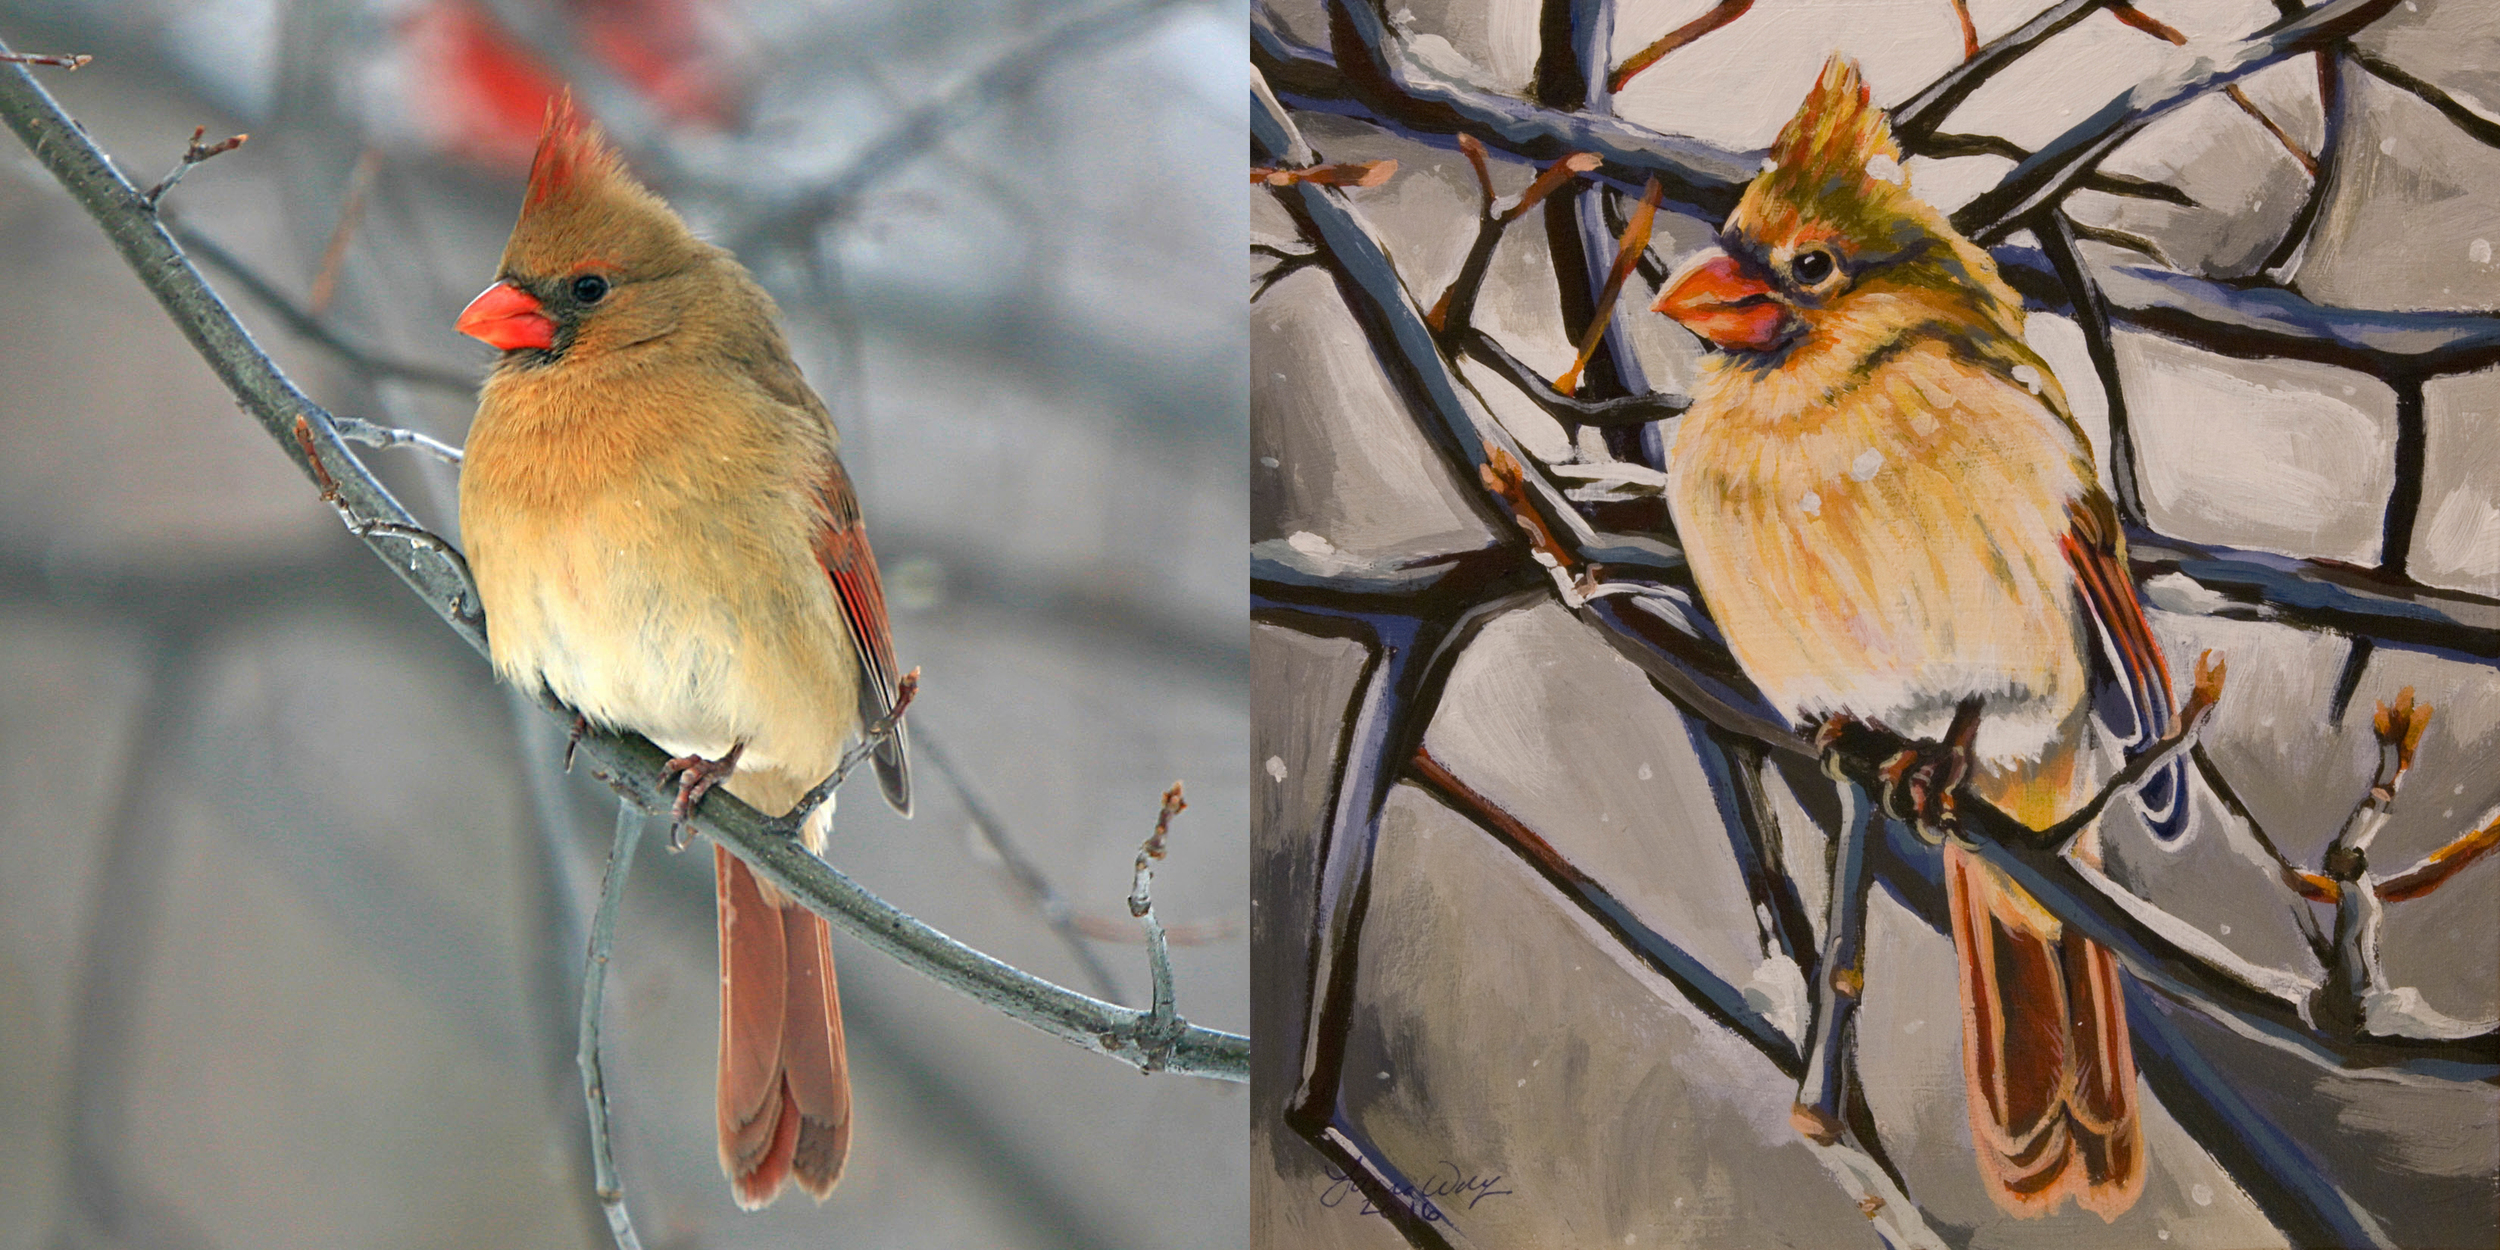 Northern Cardinal Female, for Sally Dinsmore